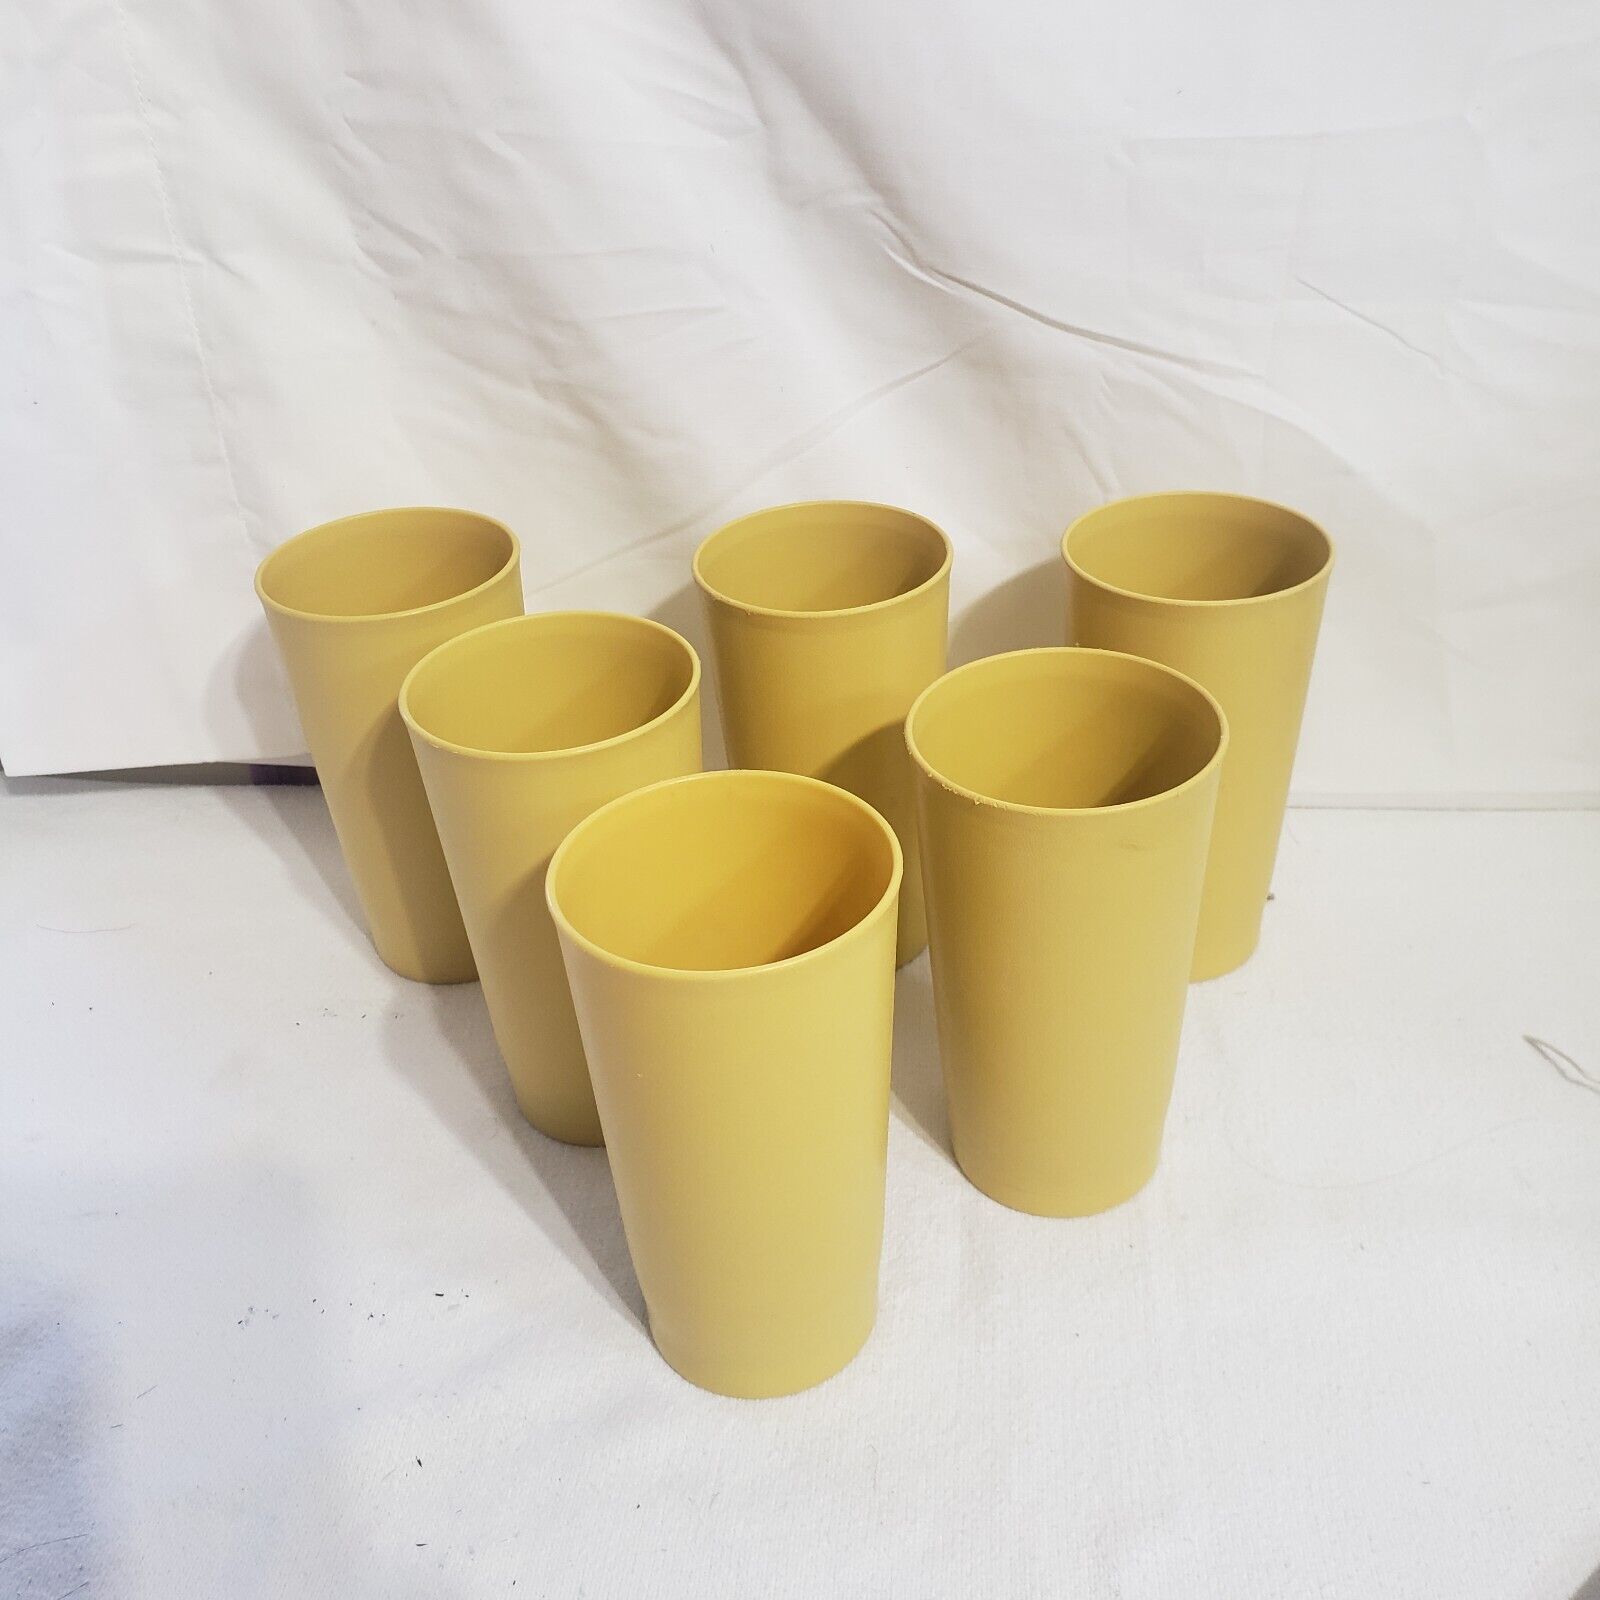 Primary image for Tupperware Tumblers #873 Glasses 12 oz Vintage Harvest Gold Yellow Lot of 6 Cups